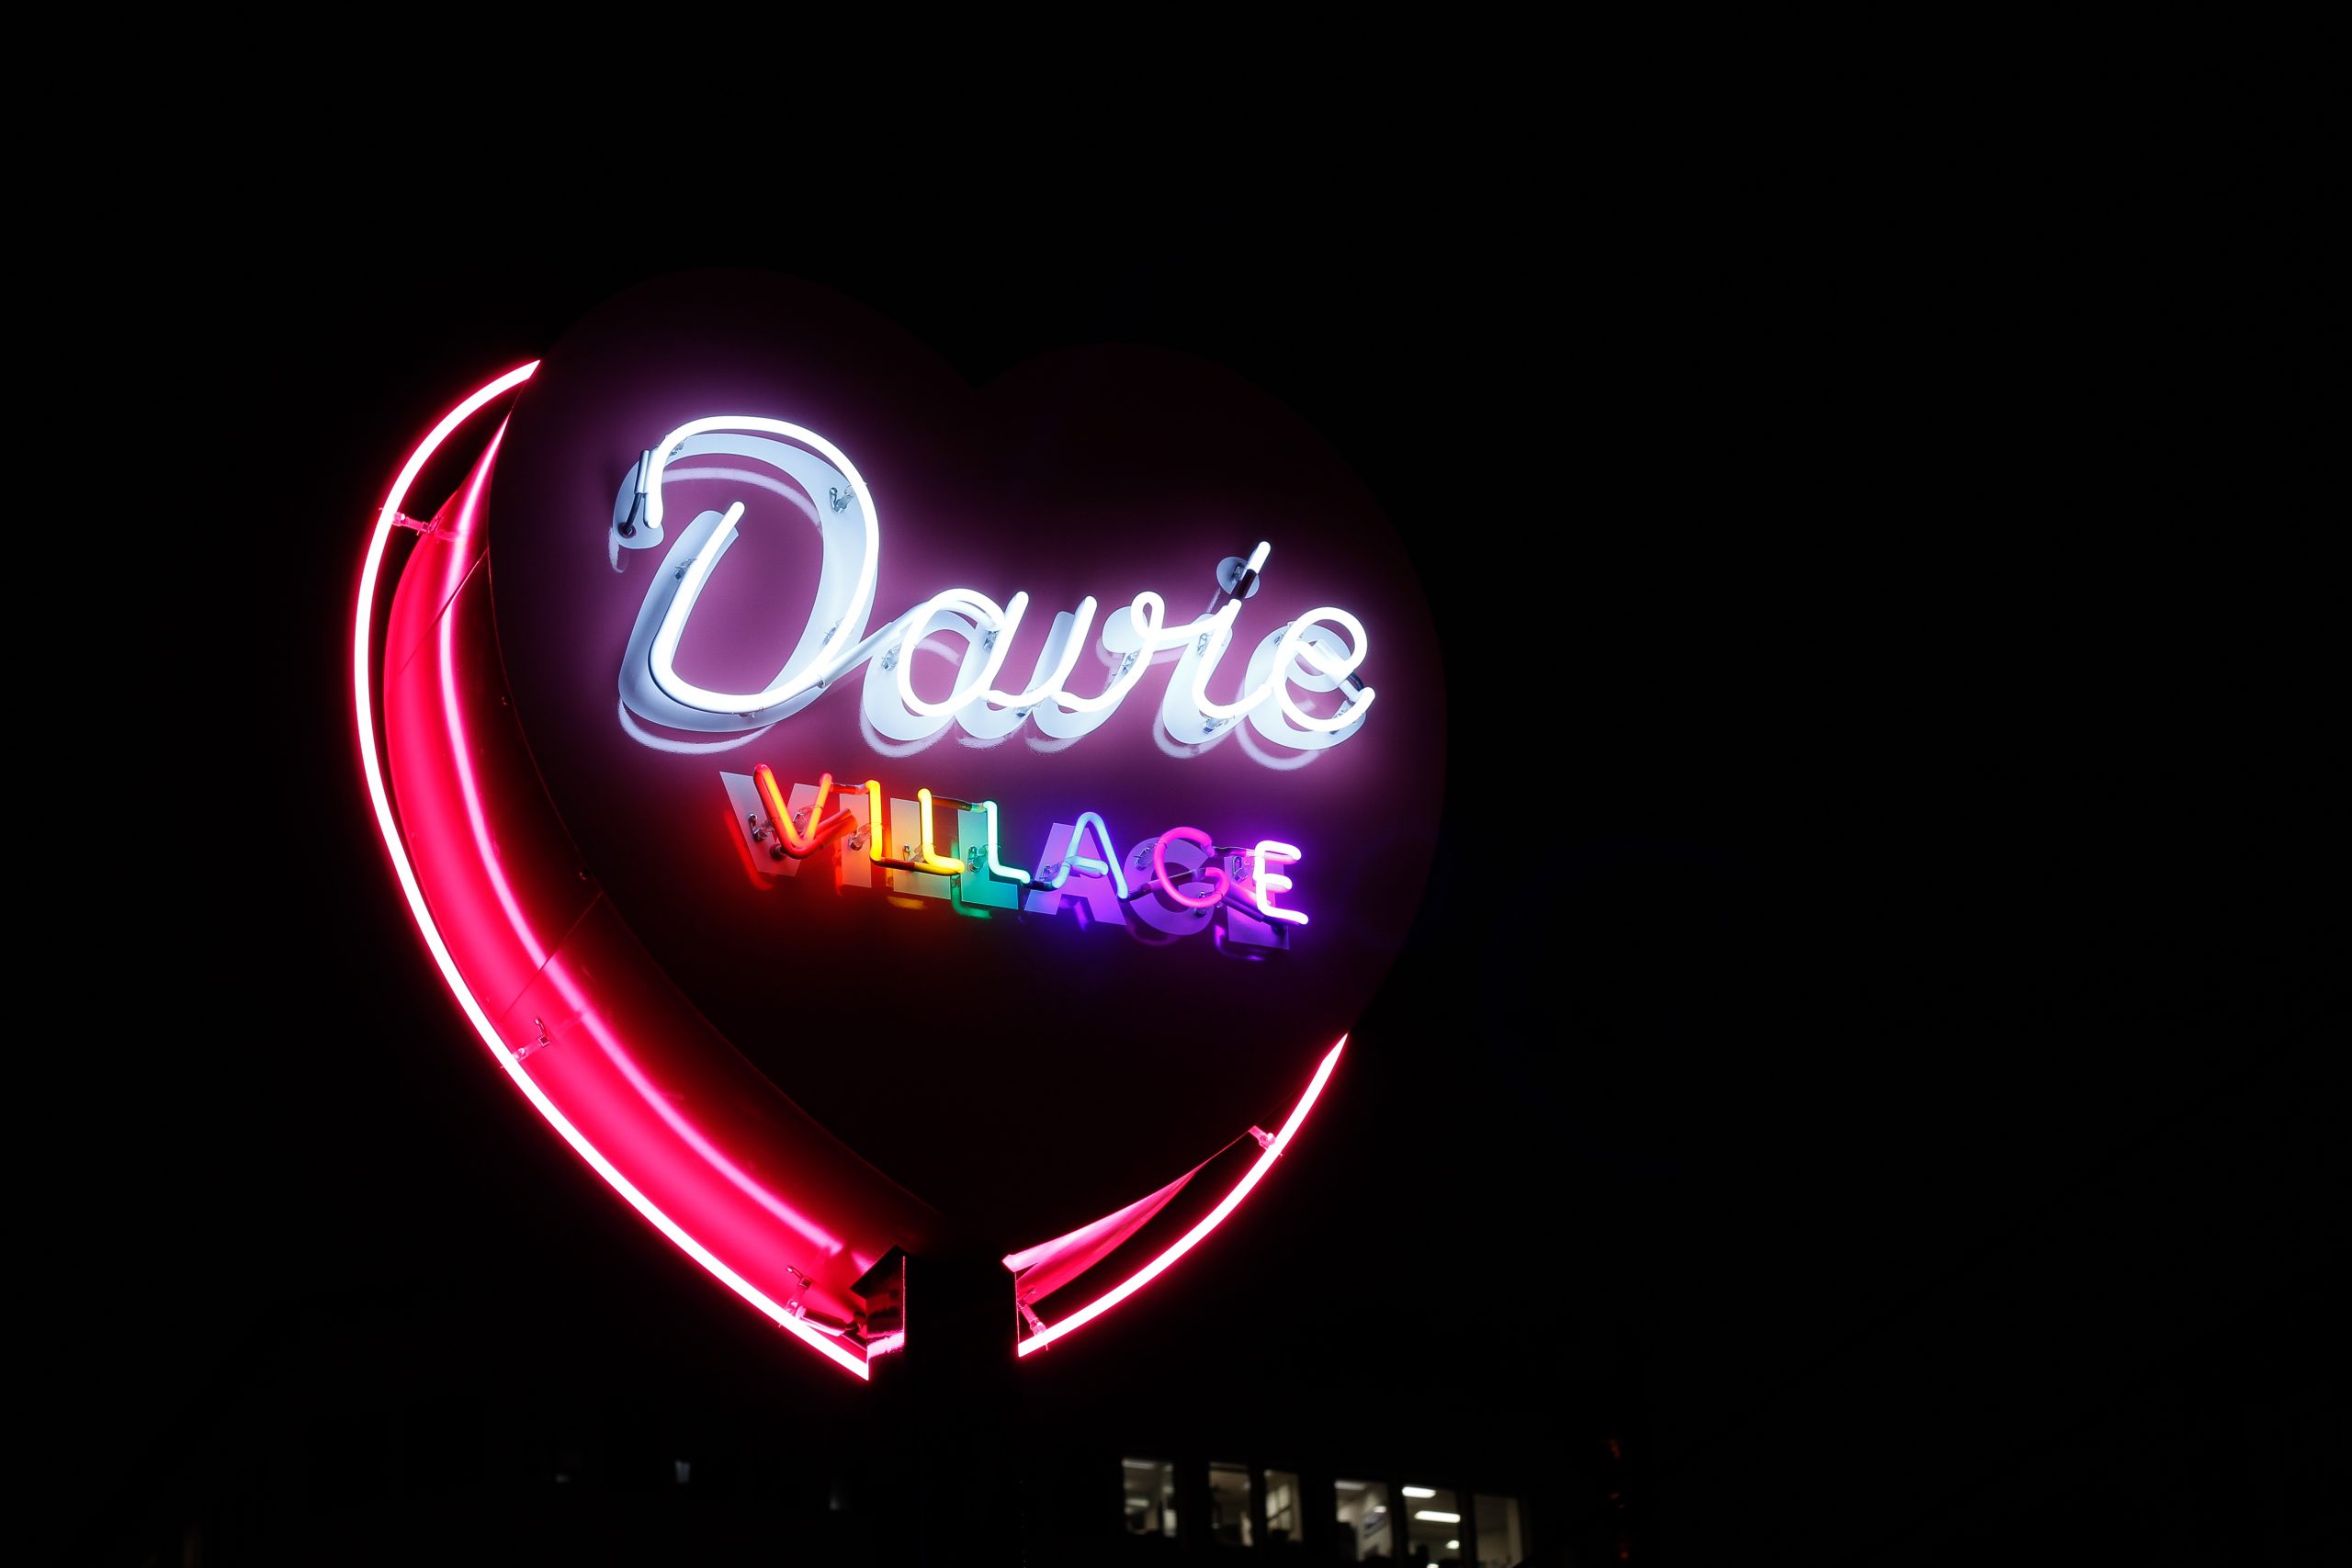 ‘Heart of Davie Village’ Unveiled in the West End